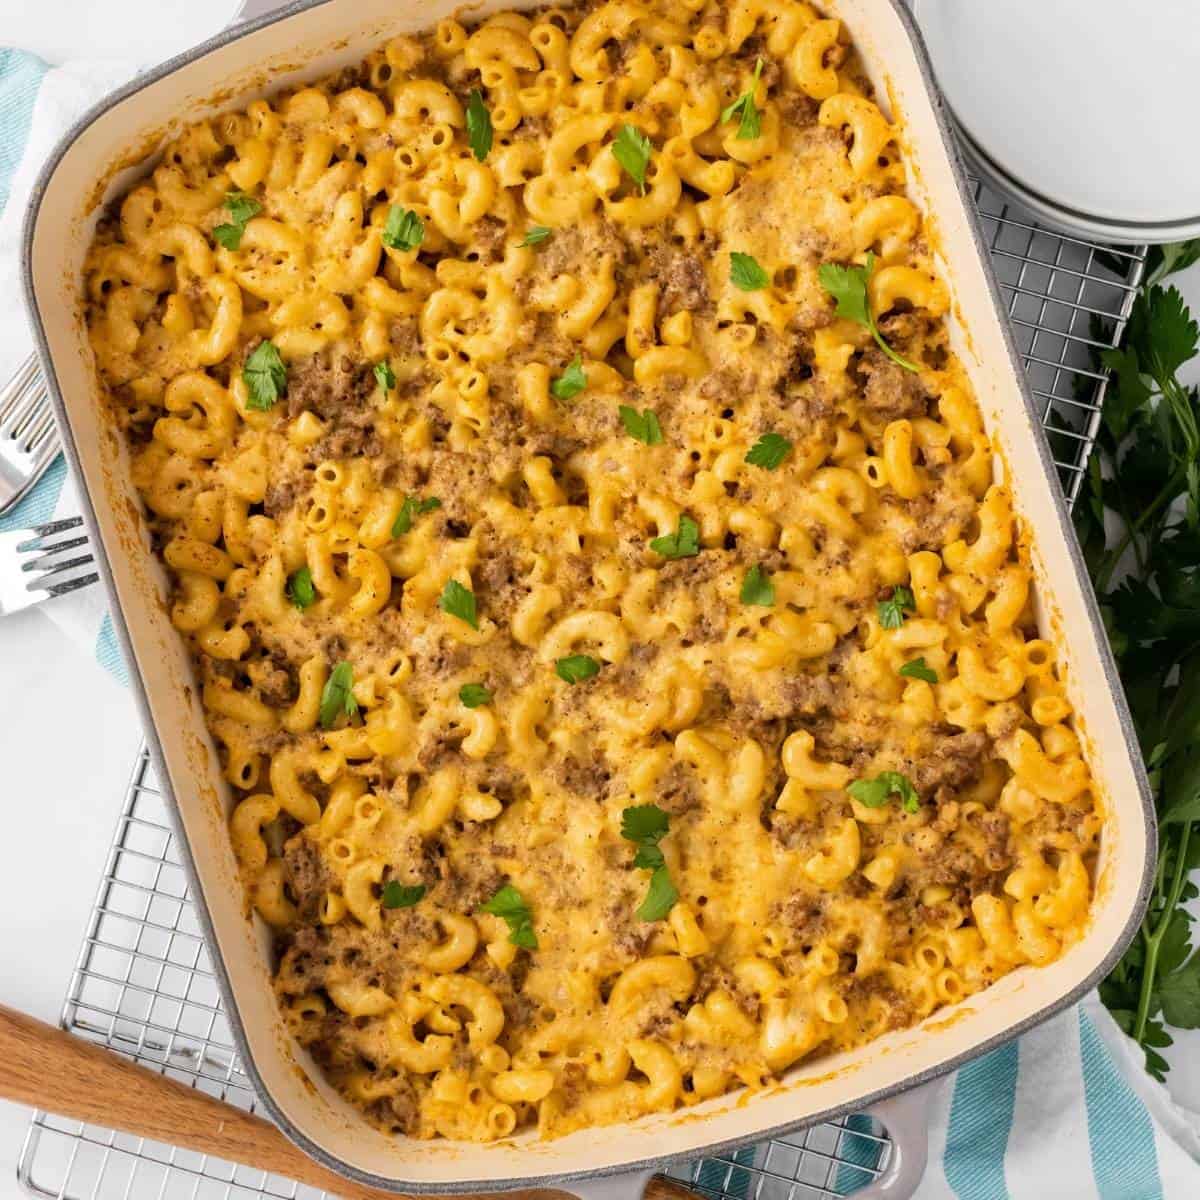 cheeseburger macaroni baked in the oven until hot and bubbly.